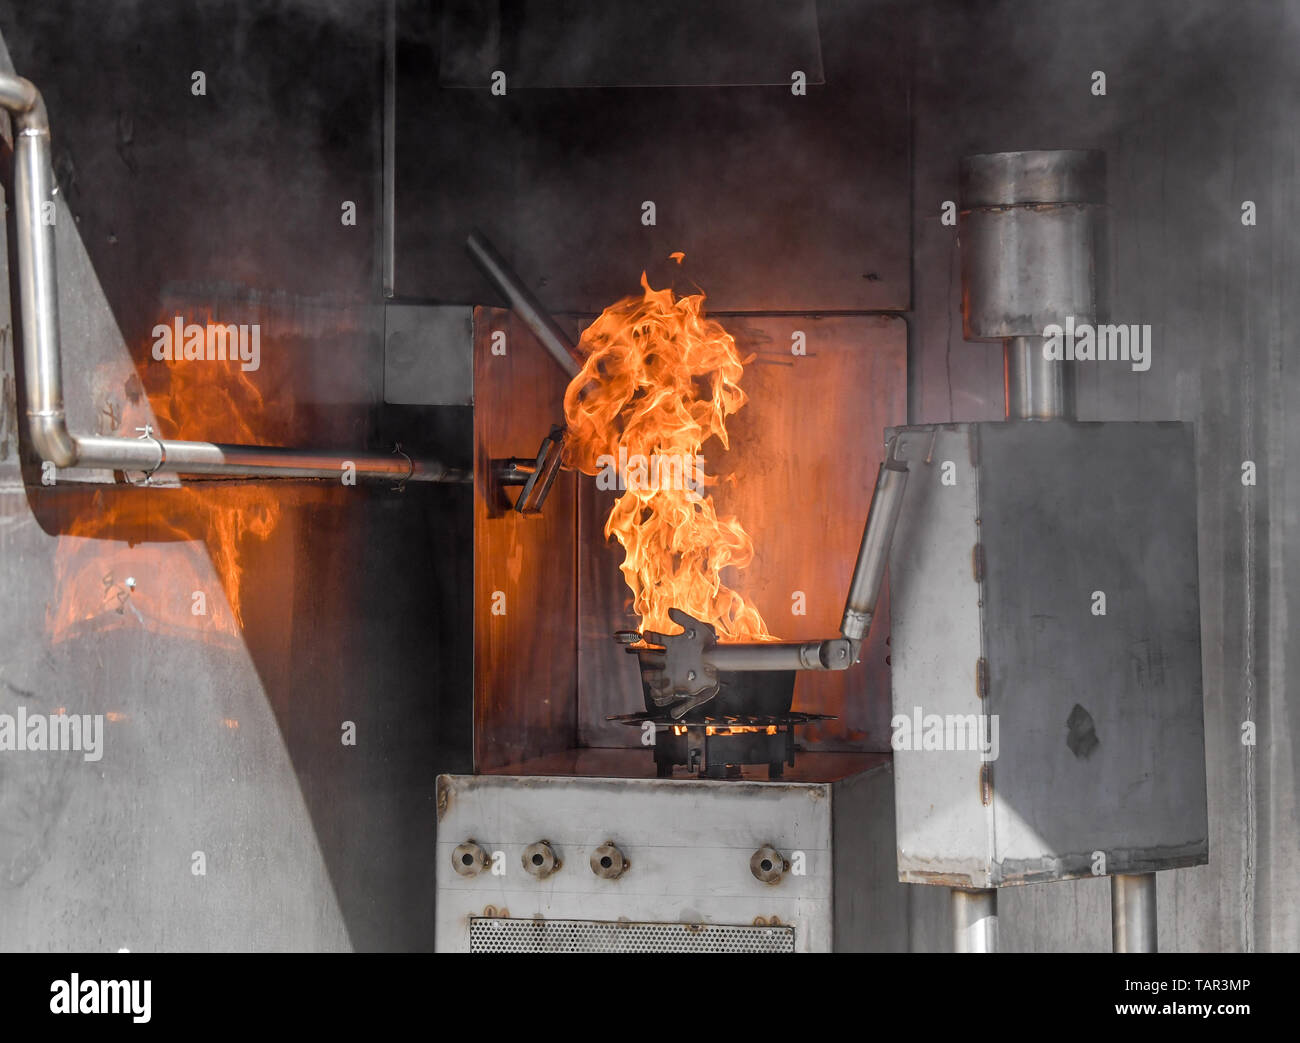 23 May 2019, Brandenburg, Frankfurt (Oder): View into a fire protection demonstration container of the volunteer fire brigade in the district Klistow. This is a simulated fat fire in a kitchen. A special container for fire protection demonstrations was inaugurated on the same day in Frankfurt (Oder). For several years, firefighters worked together with regional companies on a bright red construction that could be used to demonstrate accidents, explosions and fires in one's own home. Photo: Patrick Pleul/dpa-Zentralbild/ZB Stock Photo